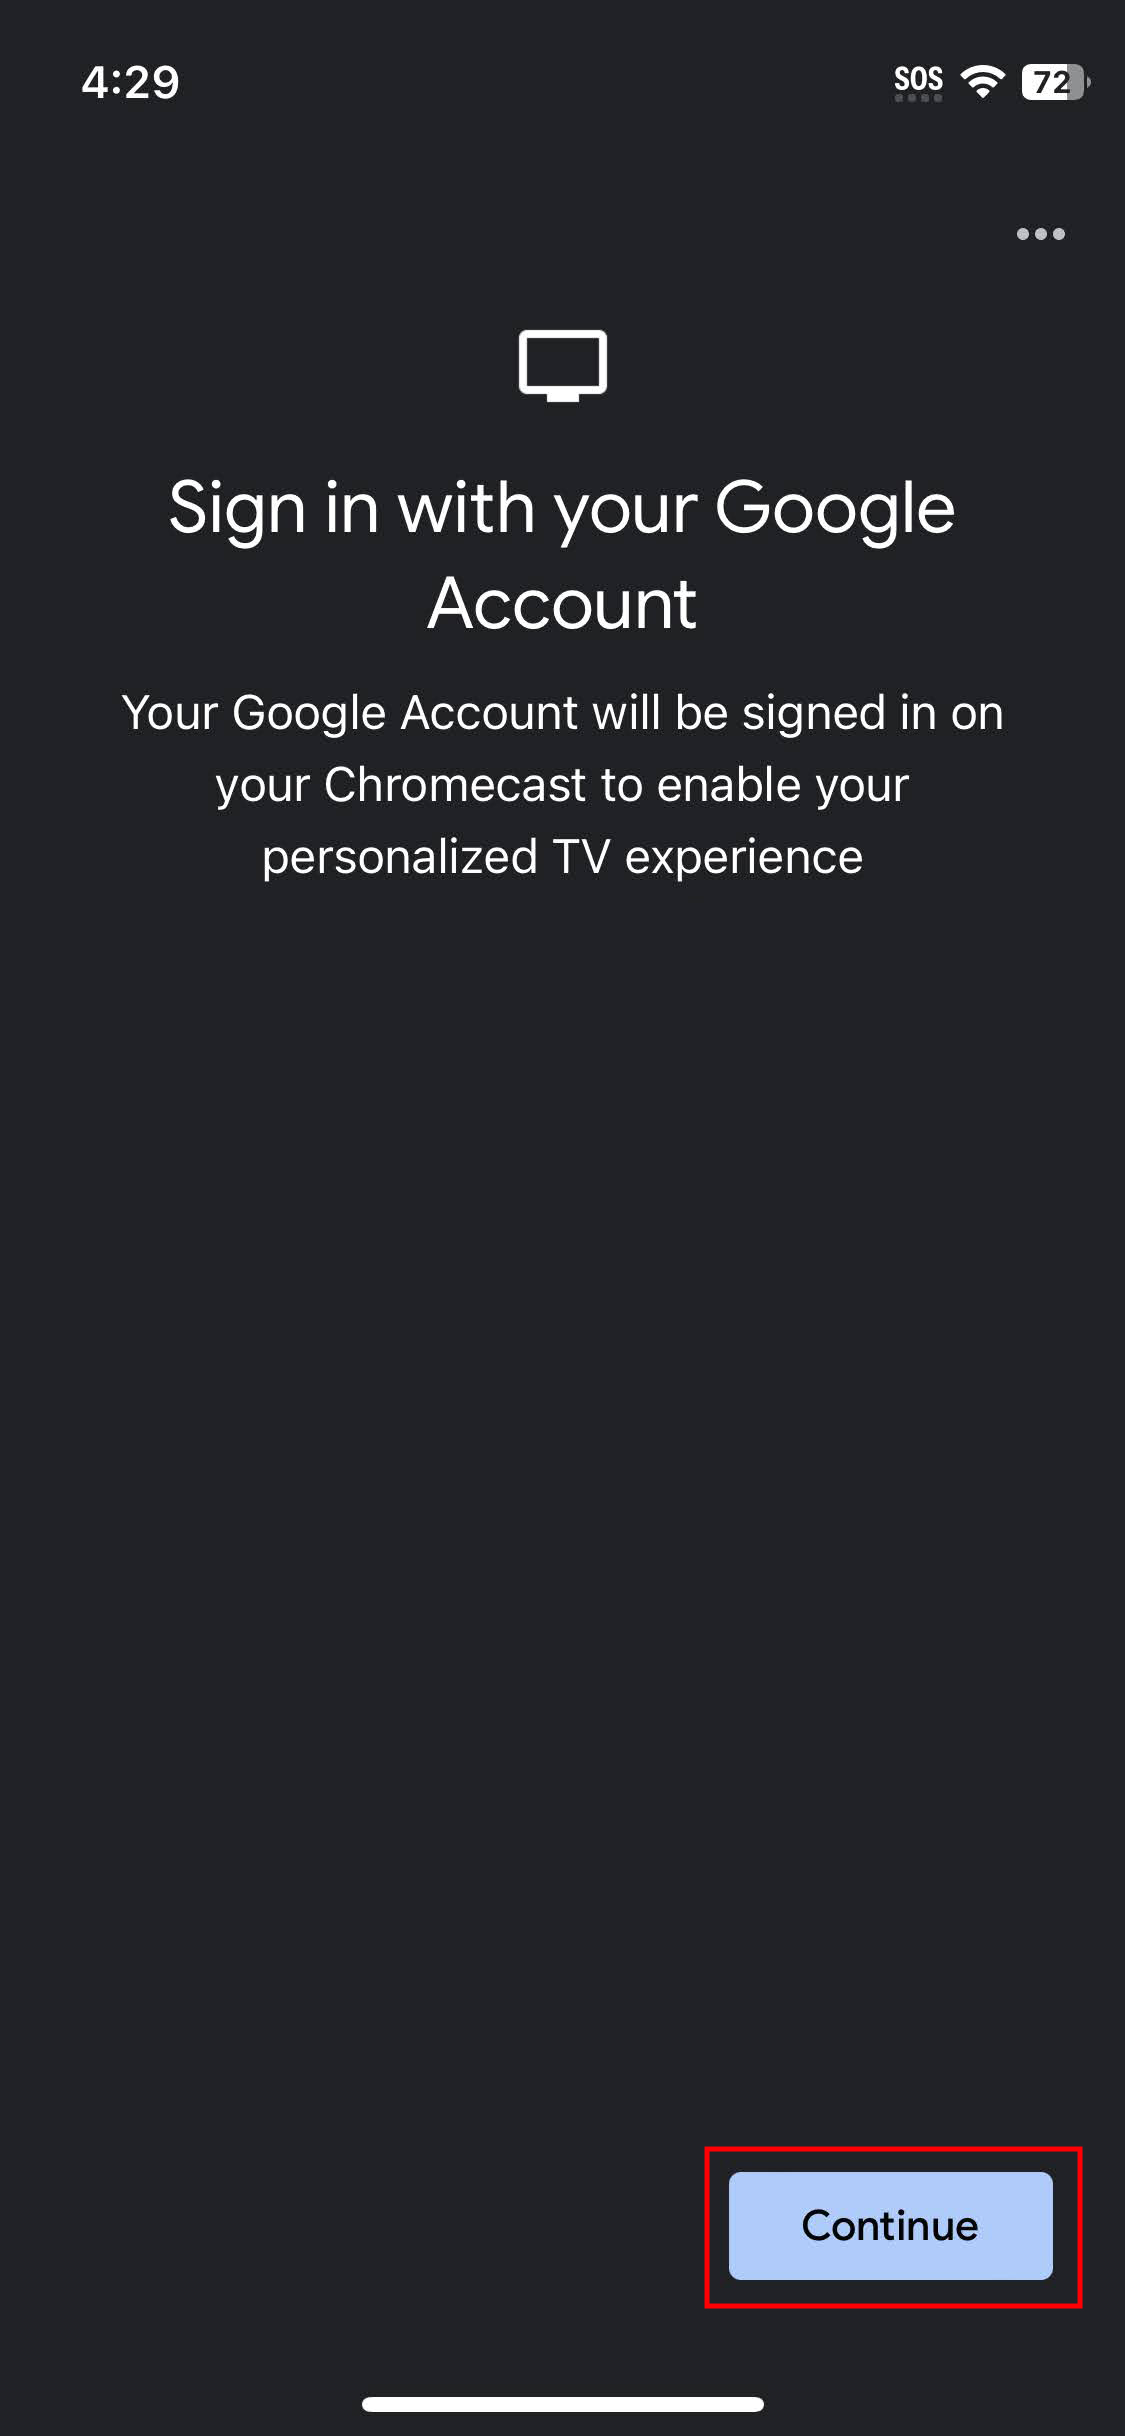 How to set up Chromecast with Google TV using an iPhone (12)